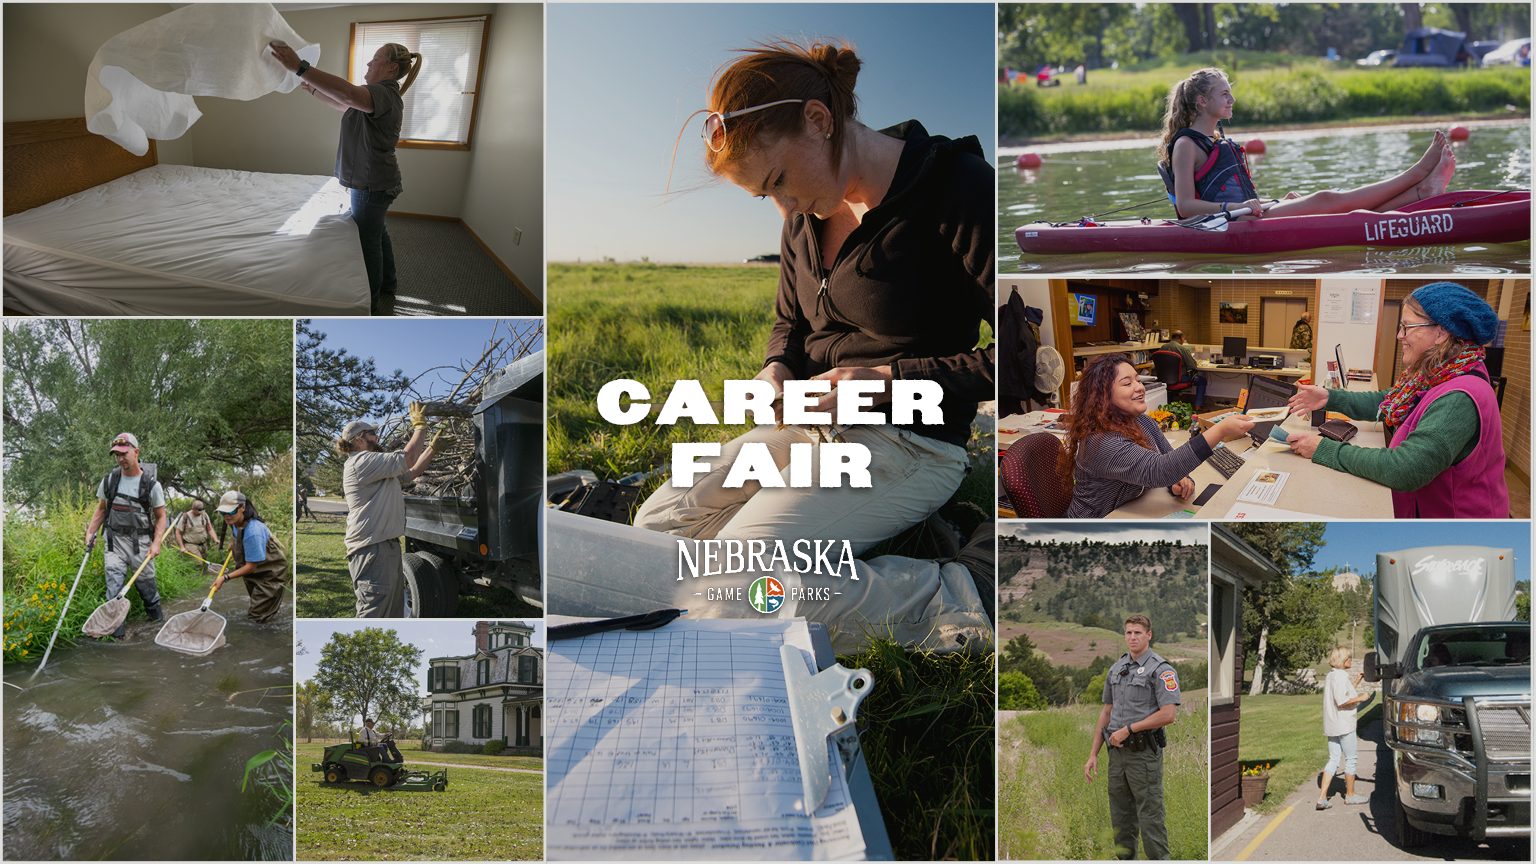 Collage of people working a variety of jobs in the outdoor setting